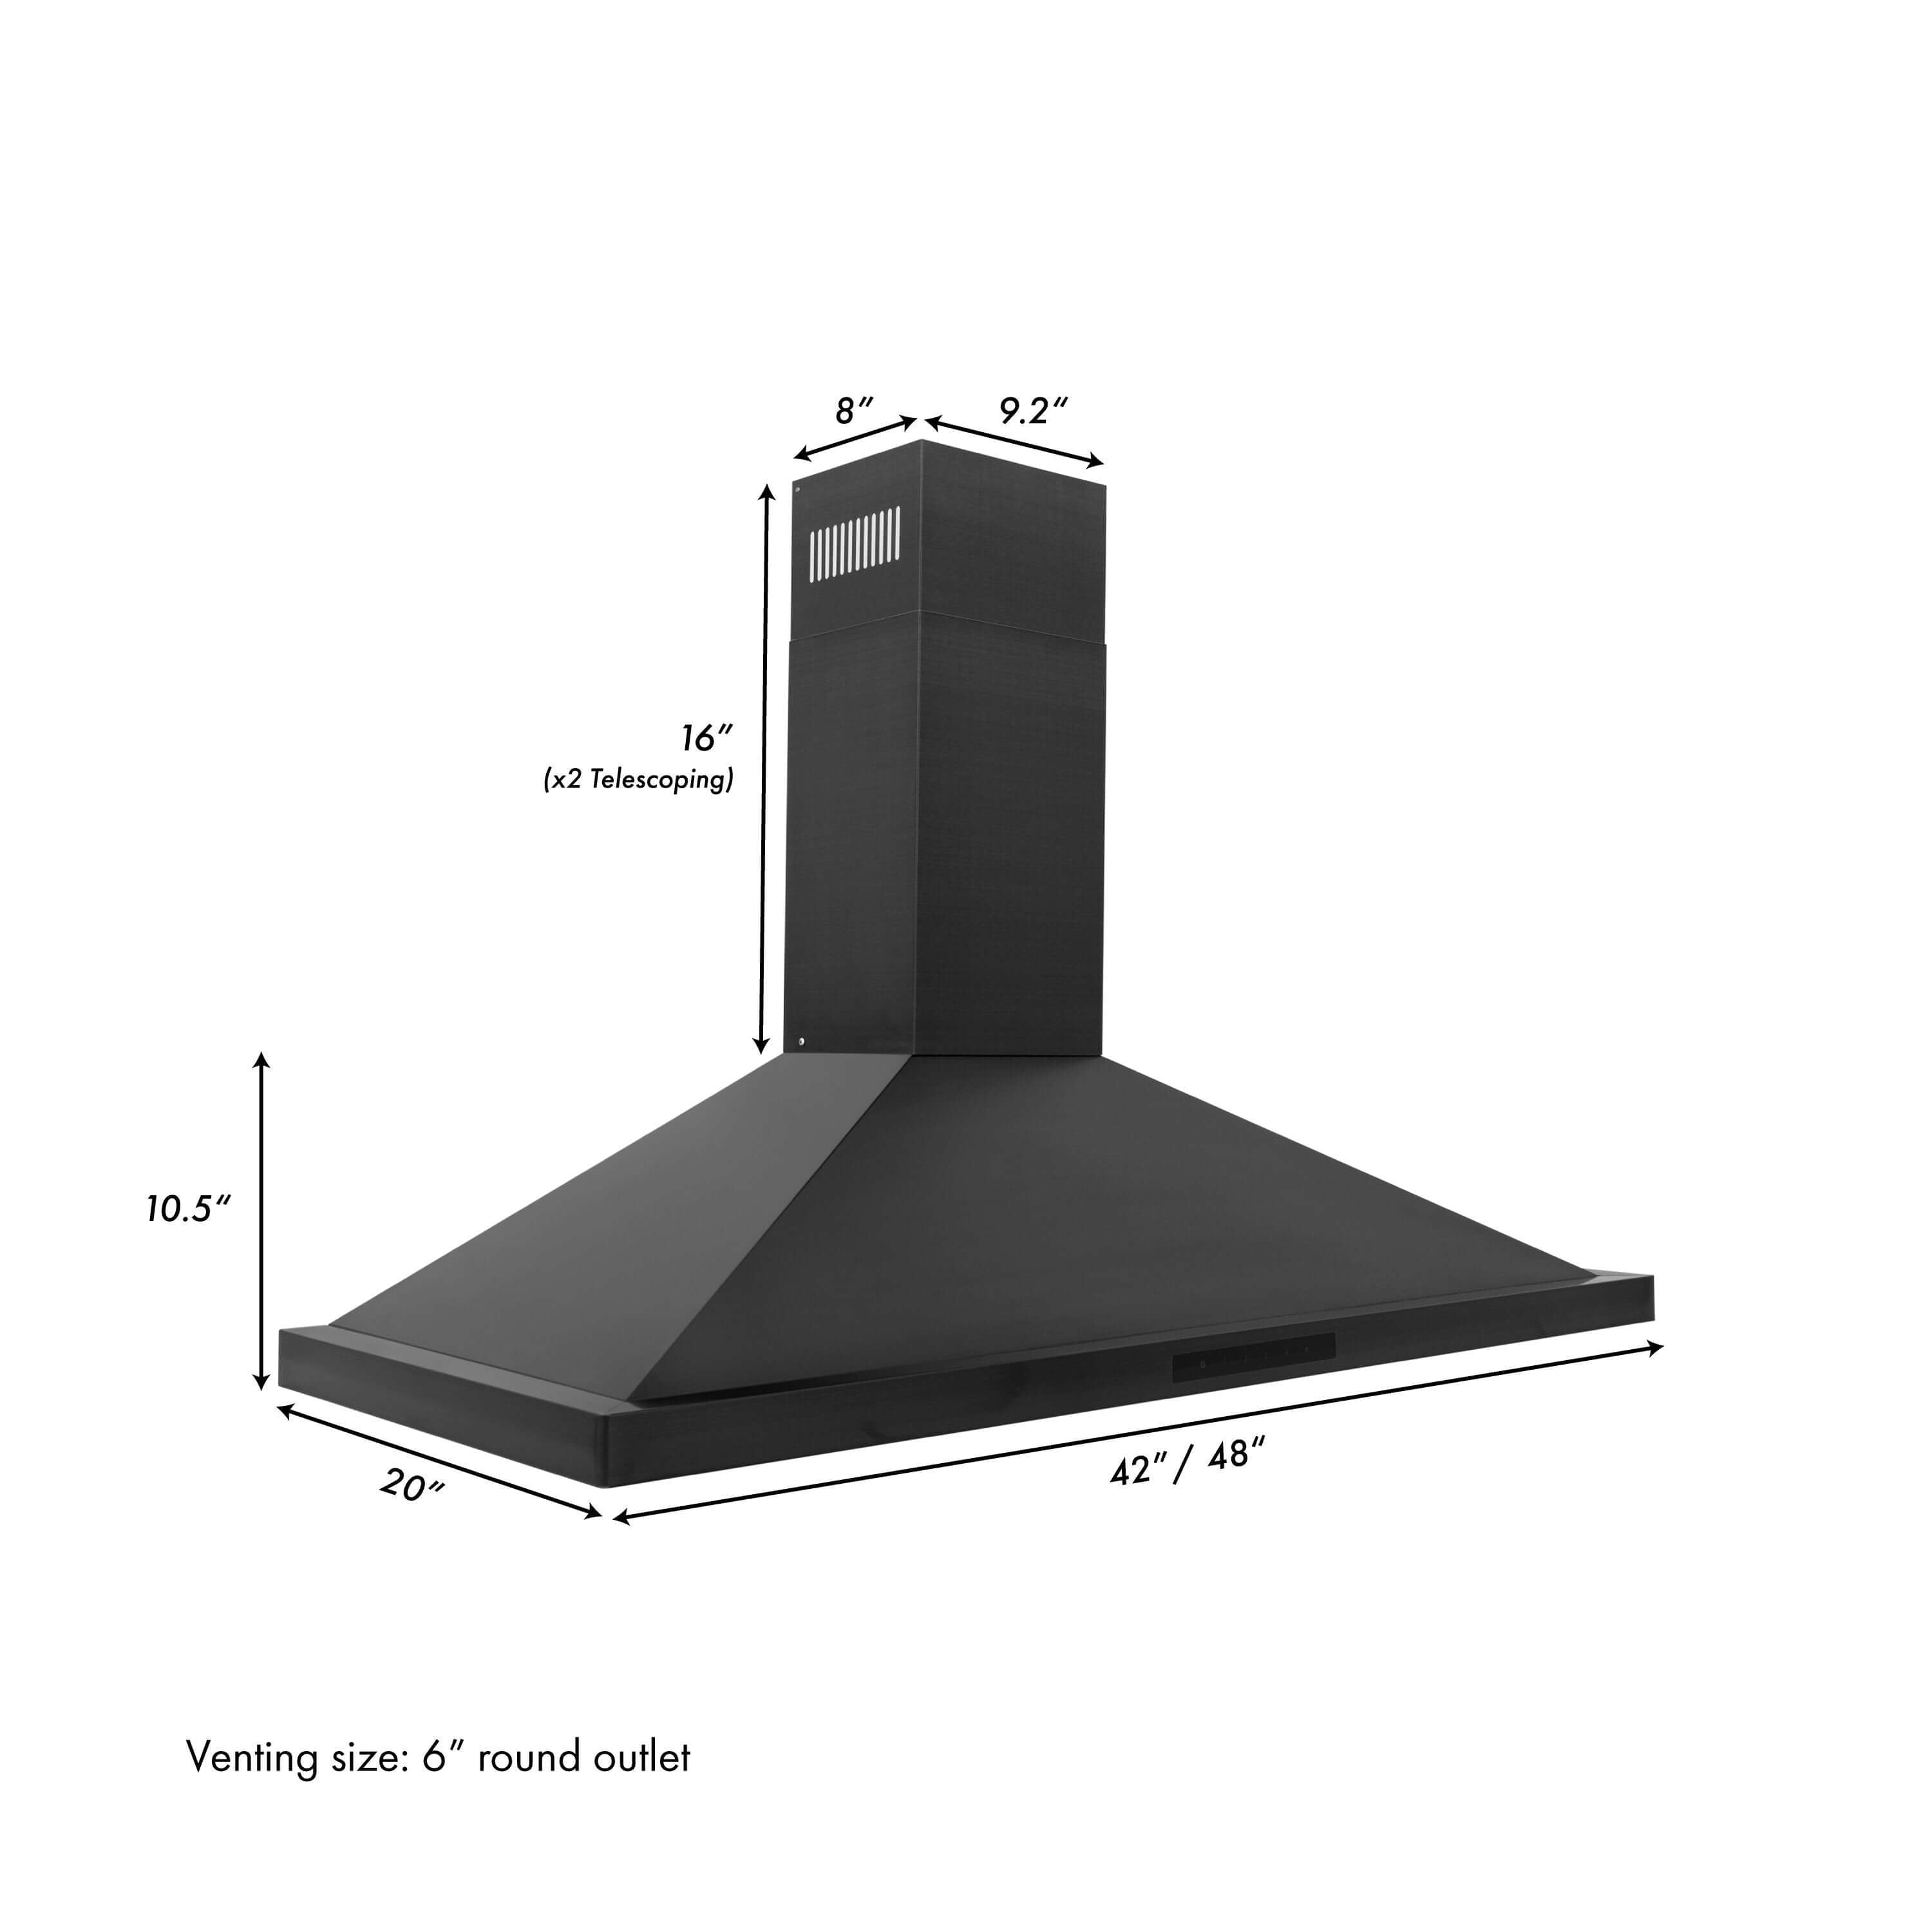 ZLINE 48 in. Recirculating Wall Mount Range Hood with Charcoal Filters in Black Stainless Steel (BSKBN-CF-48) dimensional diagram with measurements.